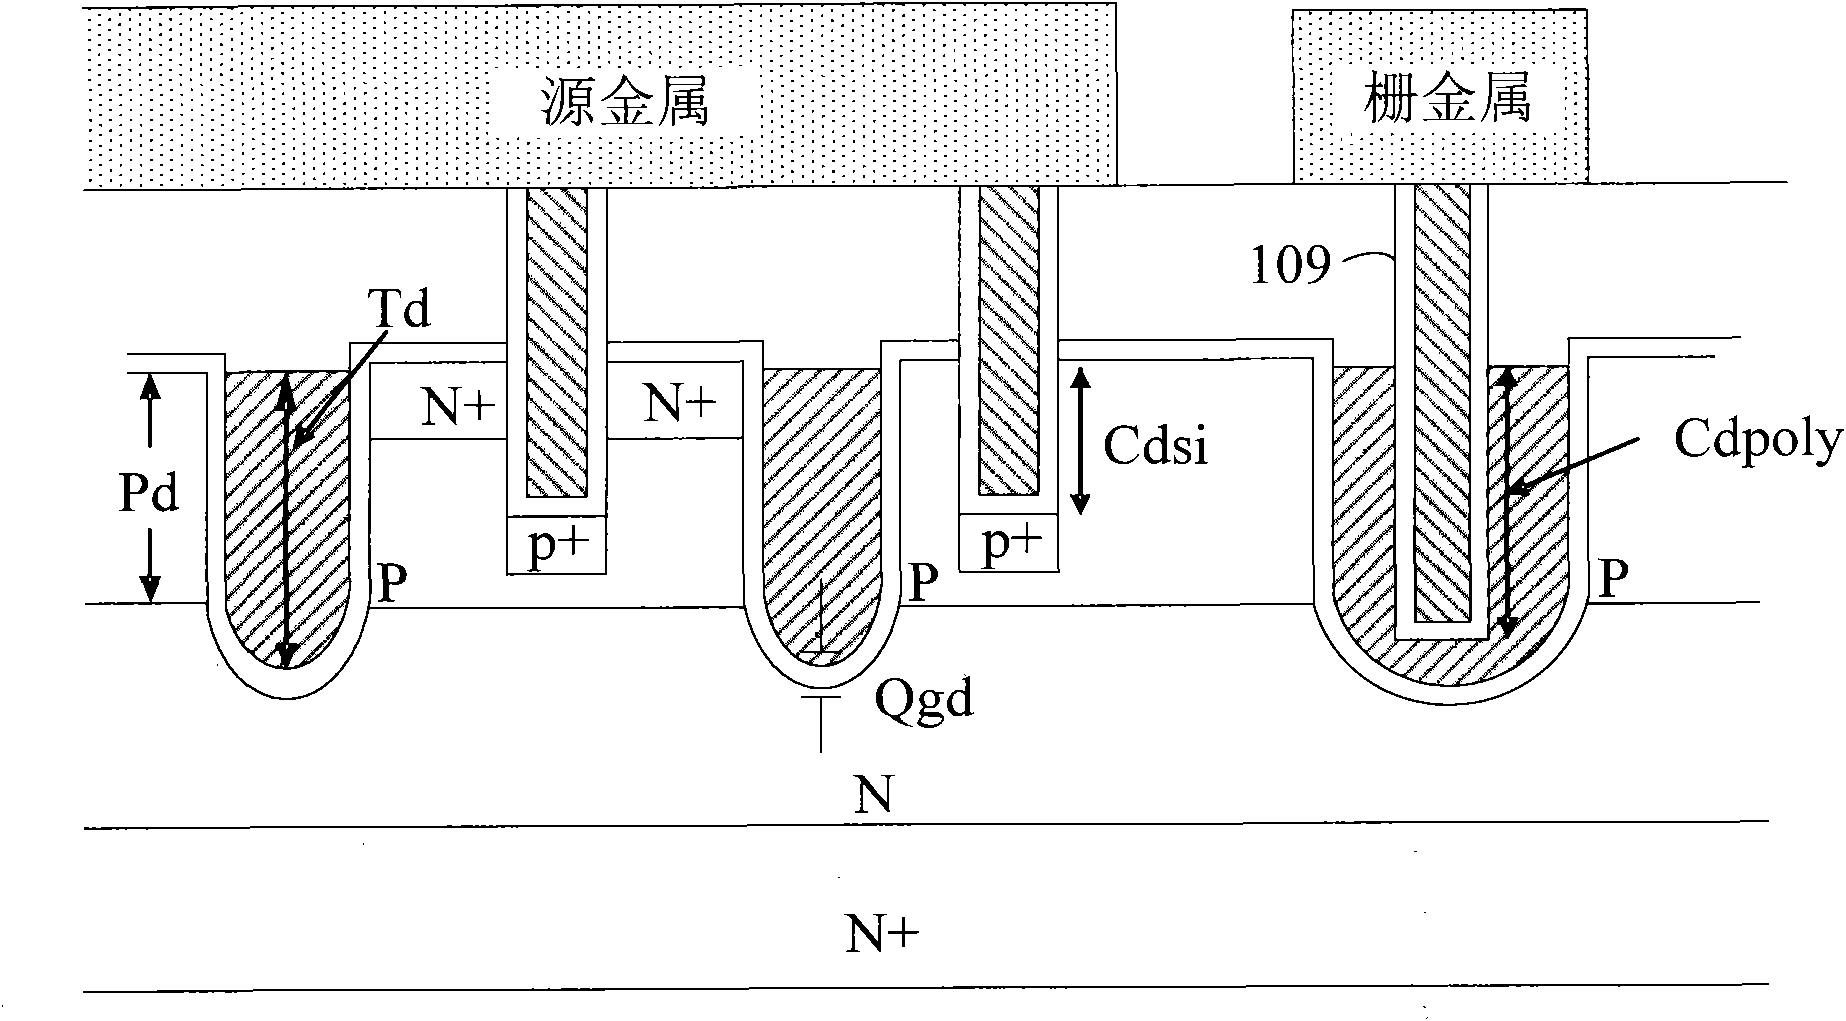 Method for manufacturing trench metal-oxide semiconductor field effect transistor (MOSFET)